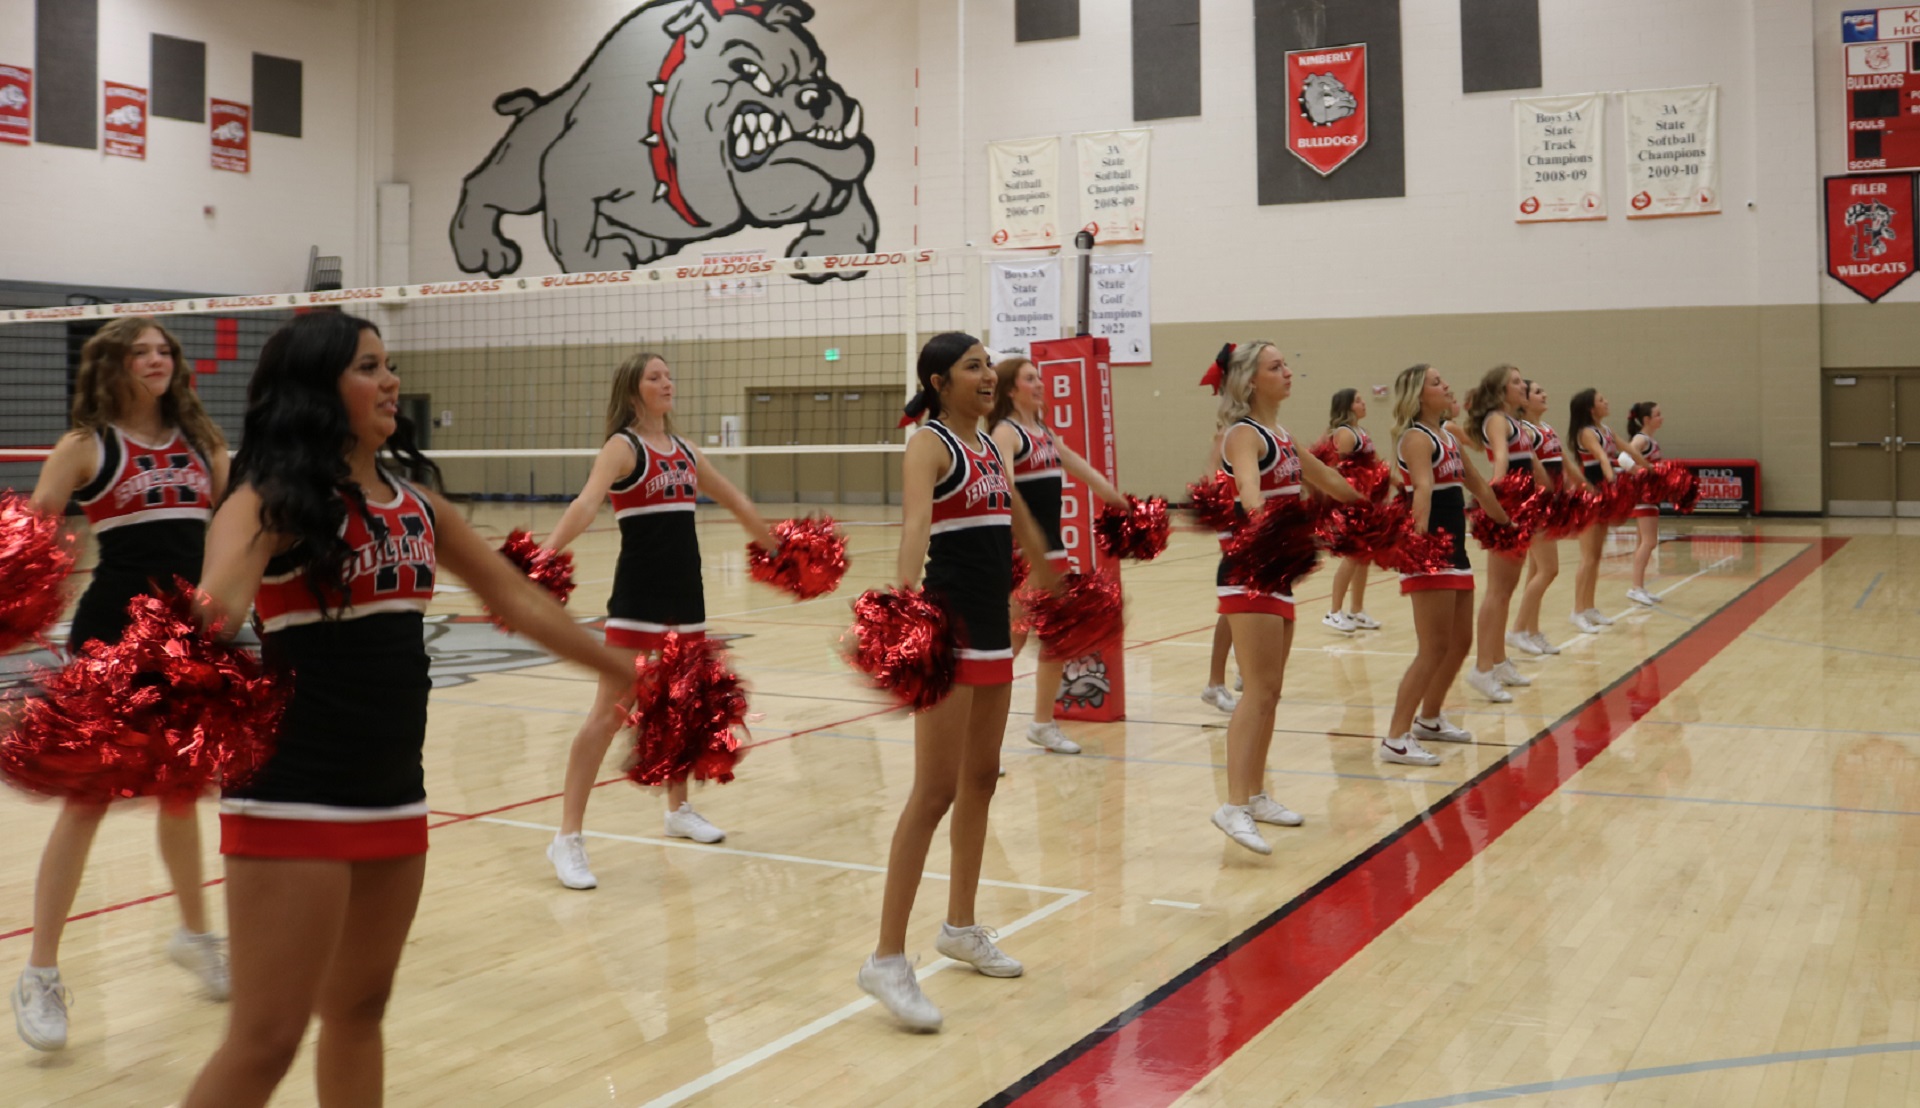 KHS cheerleaders perform during an assembly this school year. | Submitted Photo